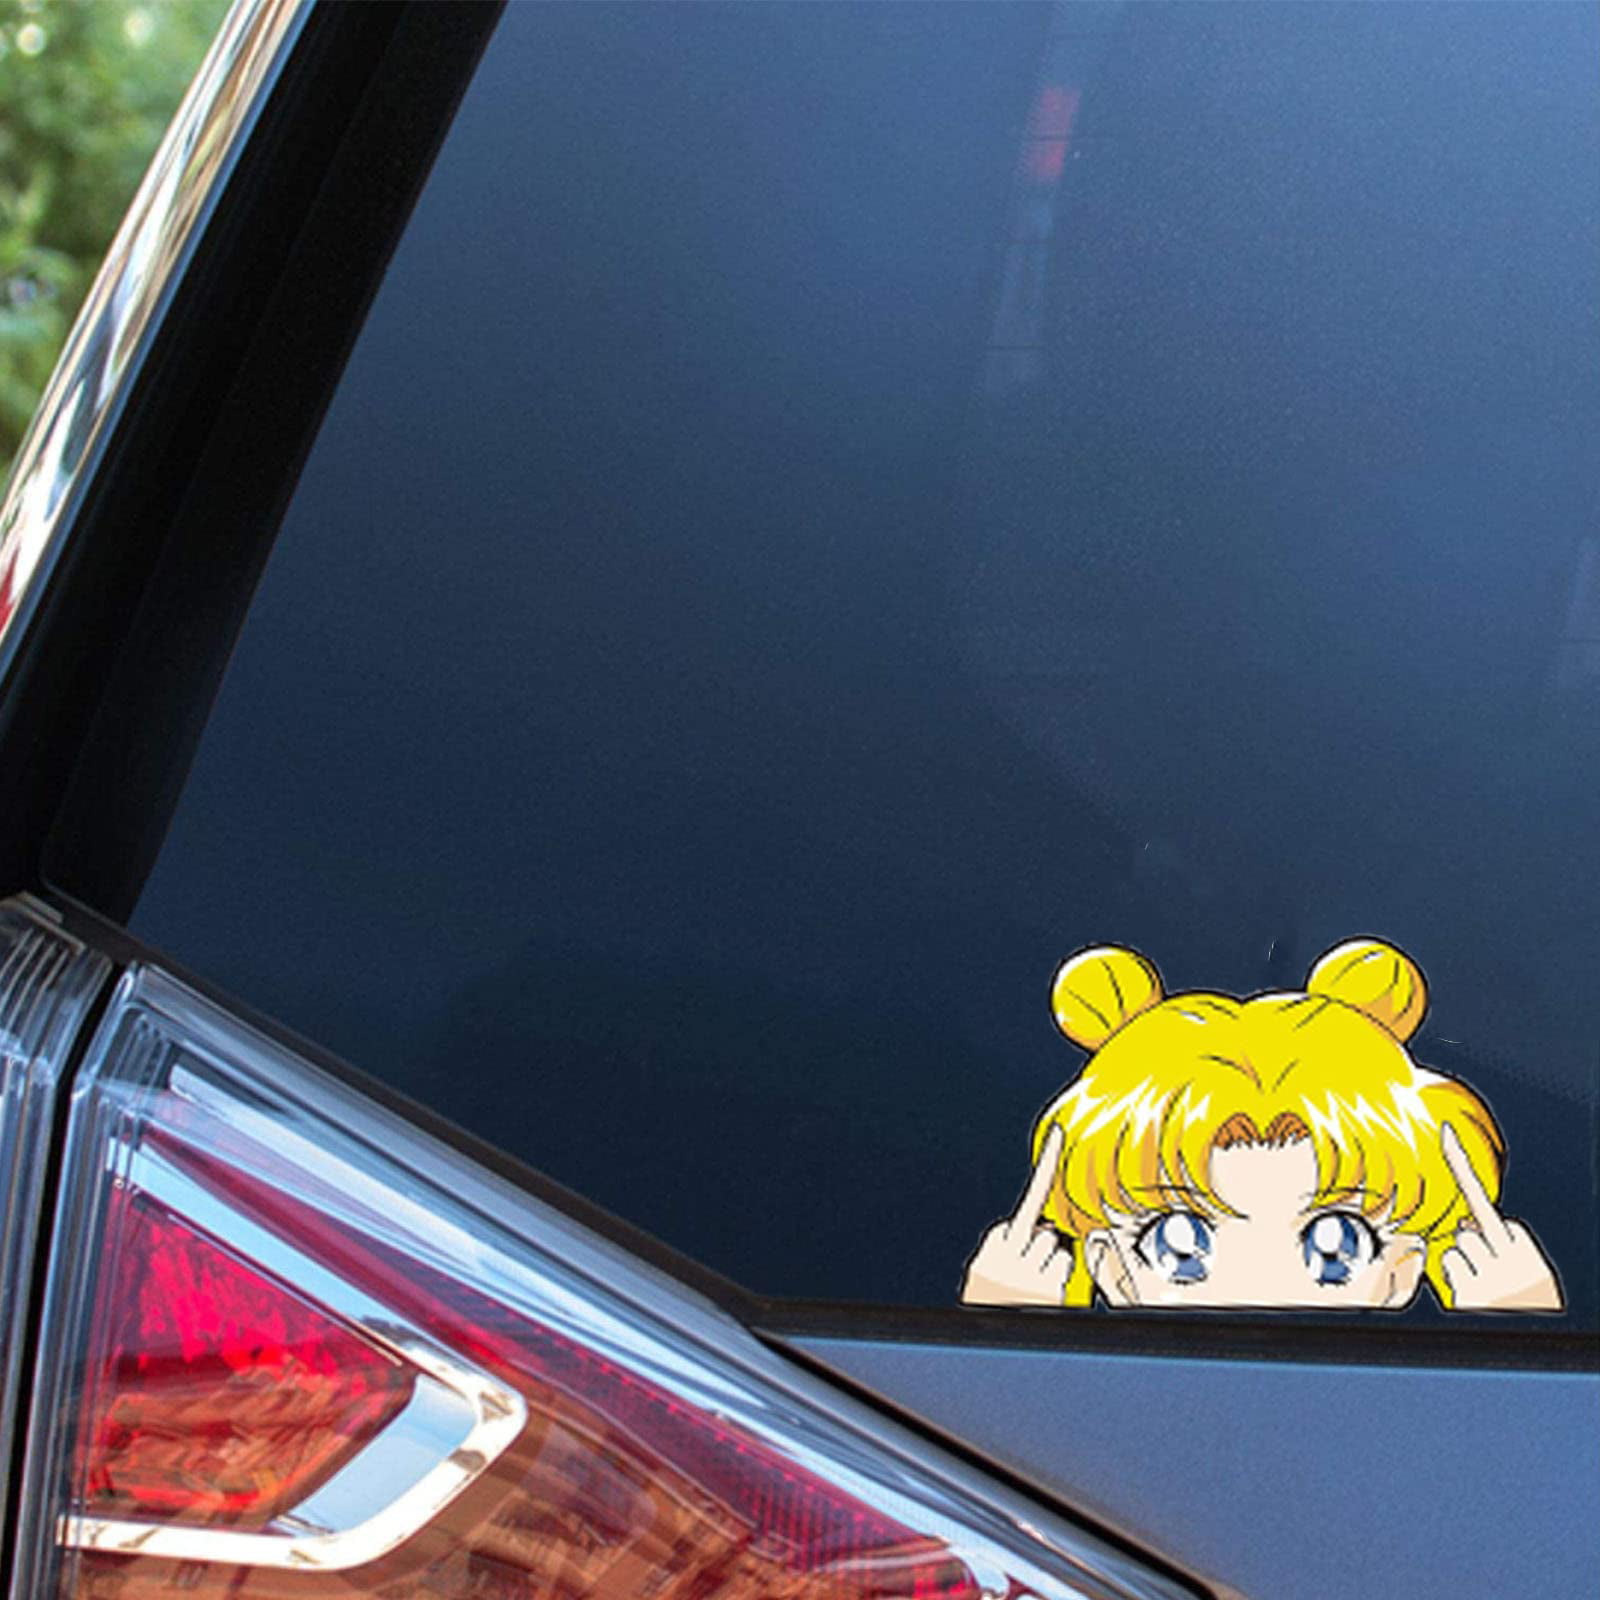 Anime Decals On Cars